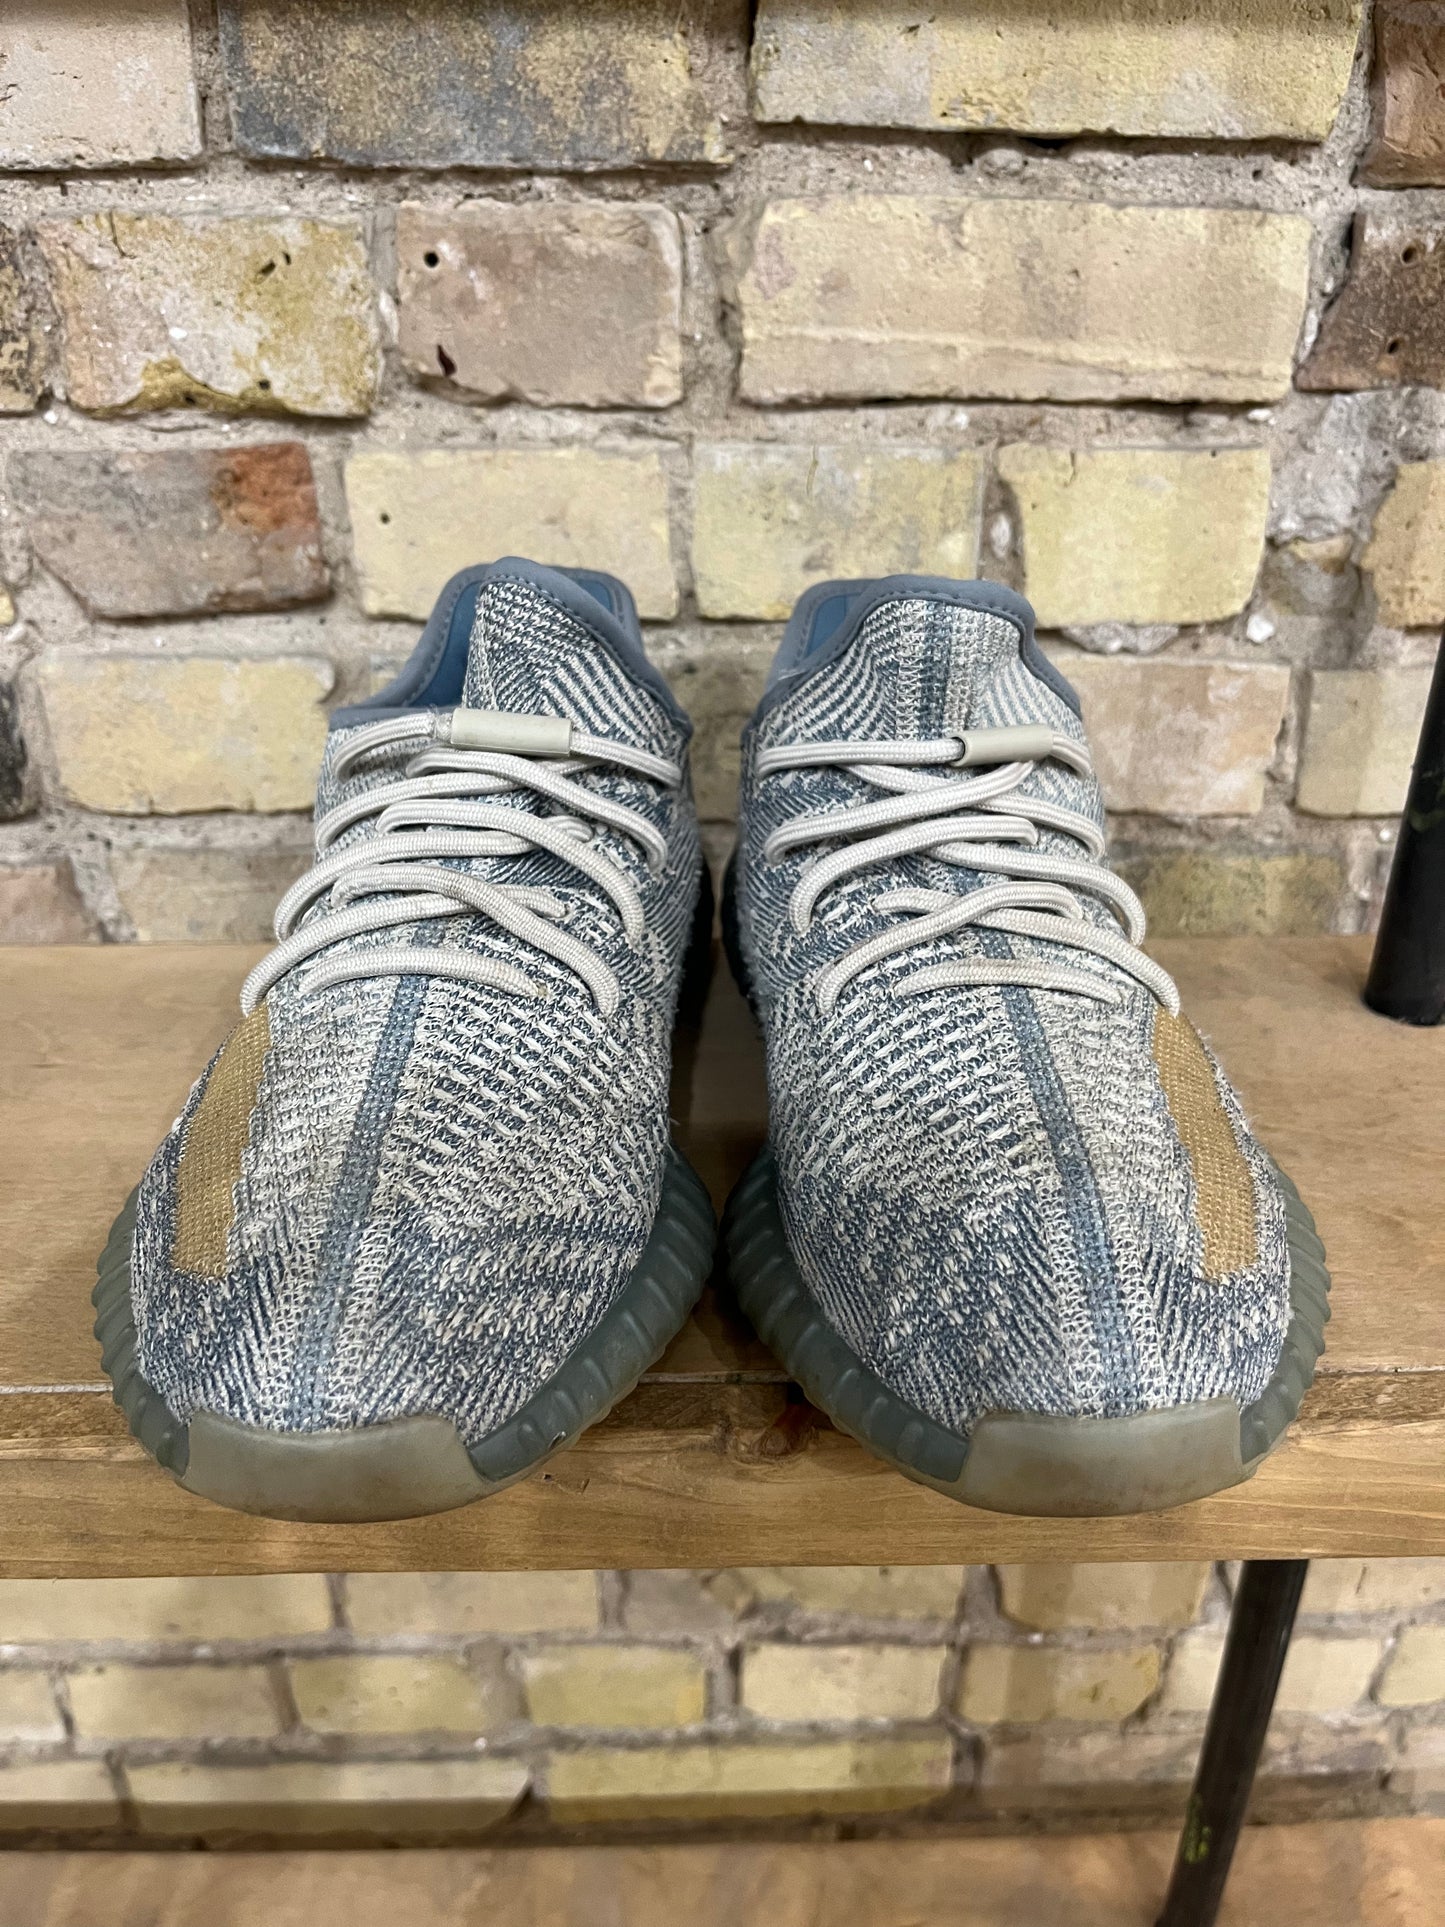 Yeezy 350 Ash Blue Size 8.5 (MKE) (Trusted Club)